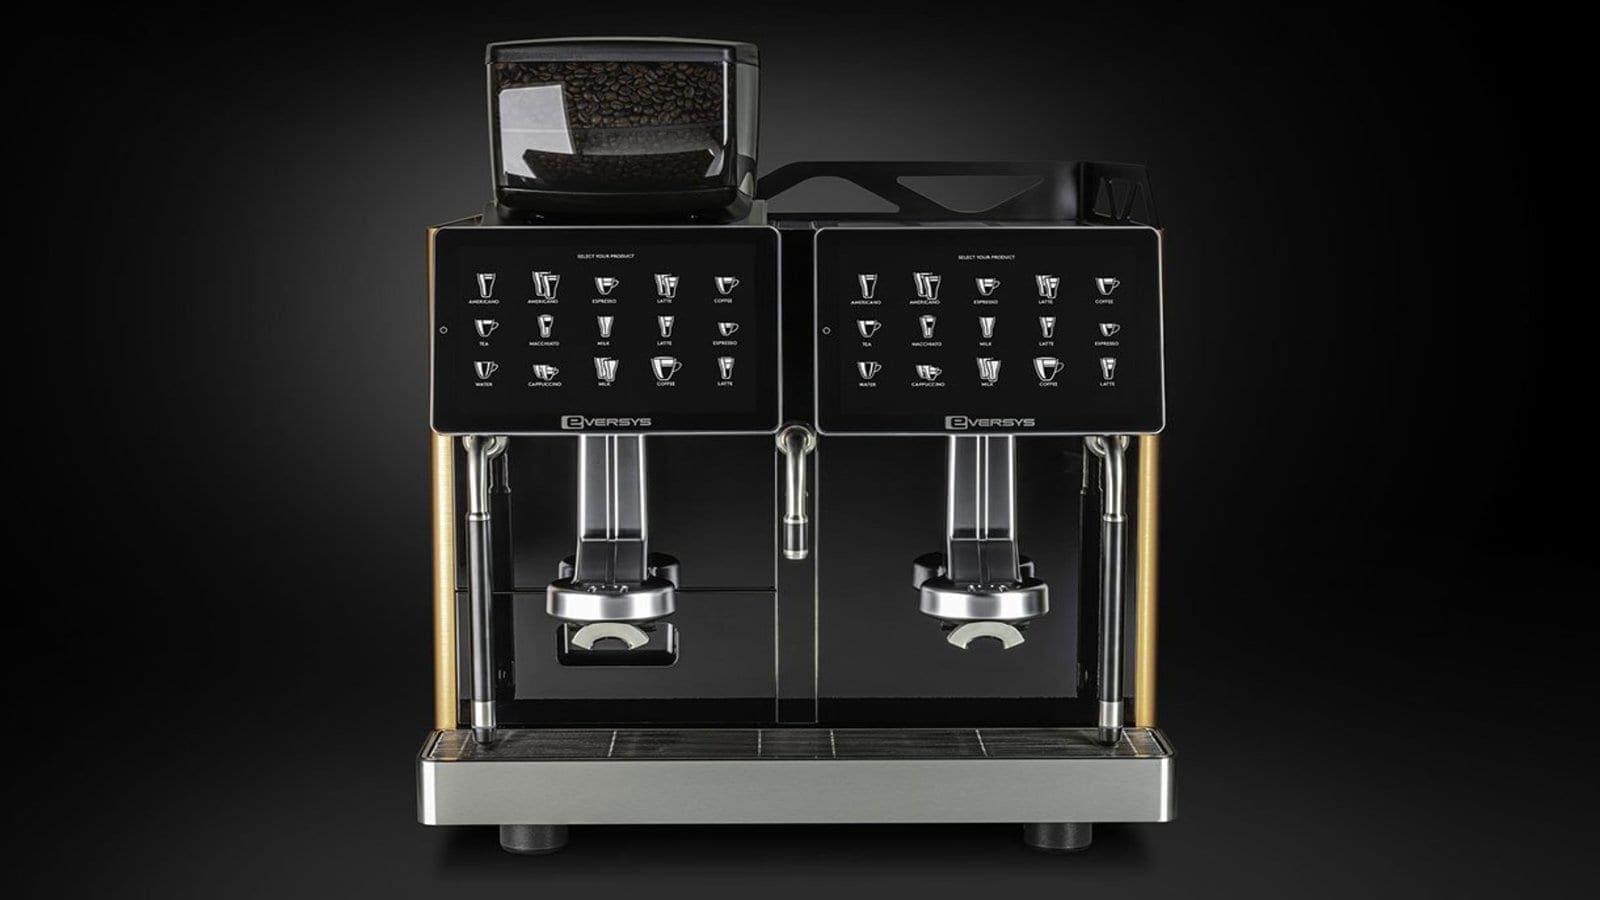 Small appliances maker De’Longhi to acquire rival Eversys as Nestlé rolls out new safety feature for coffee machines